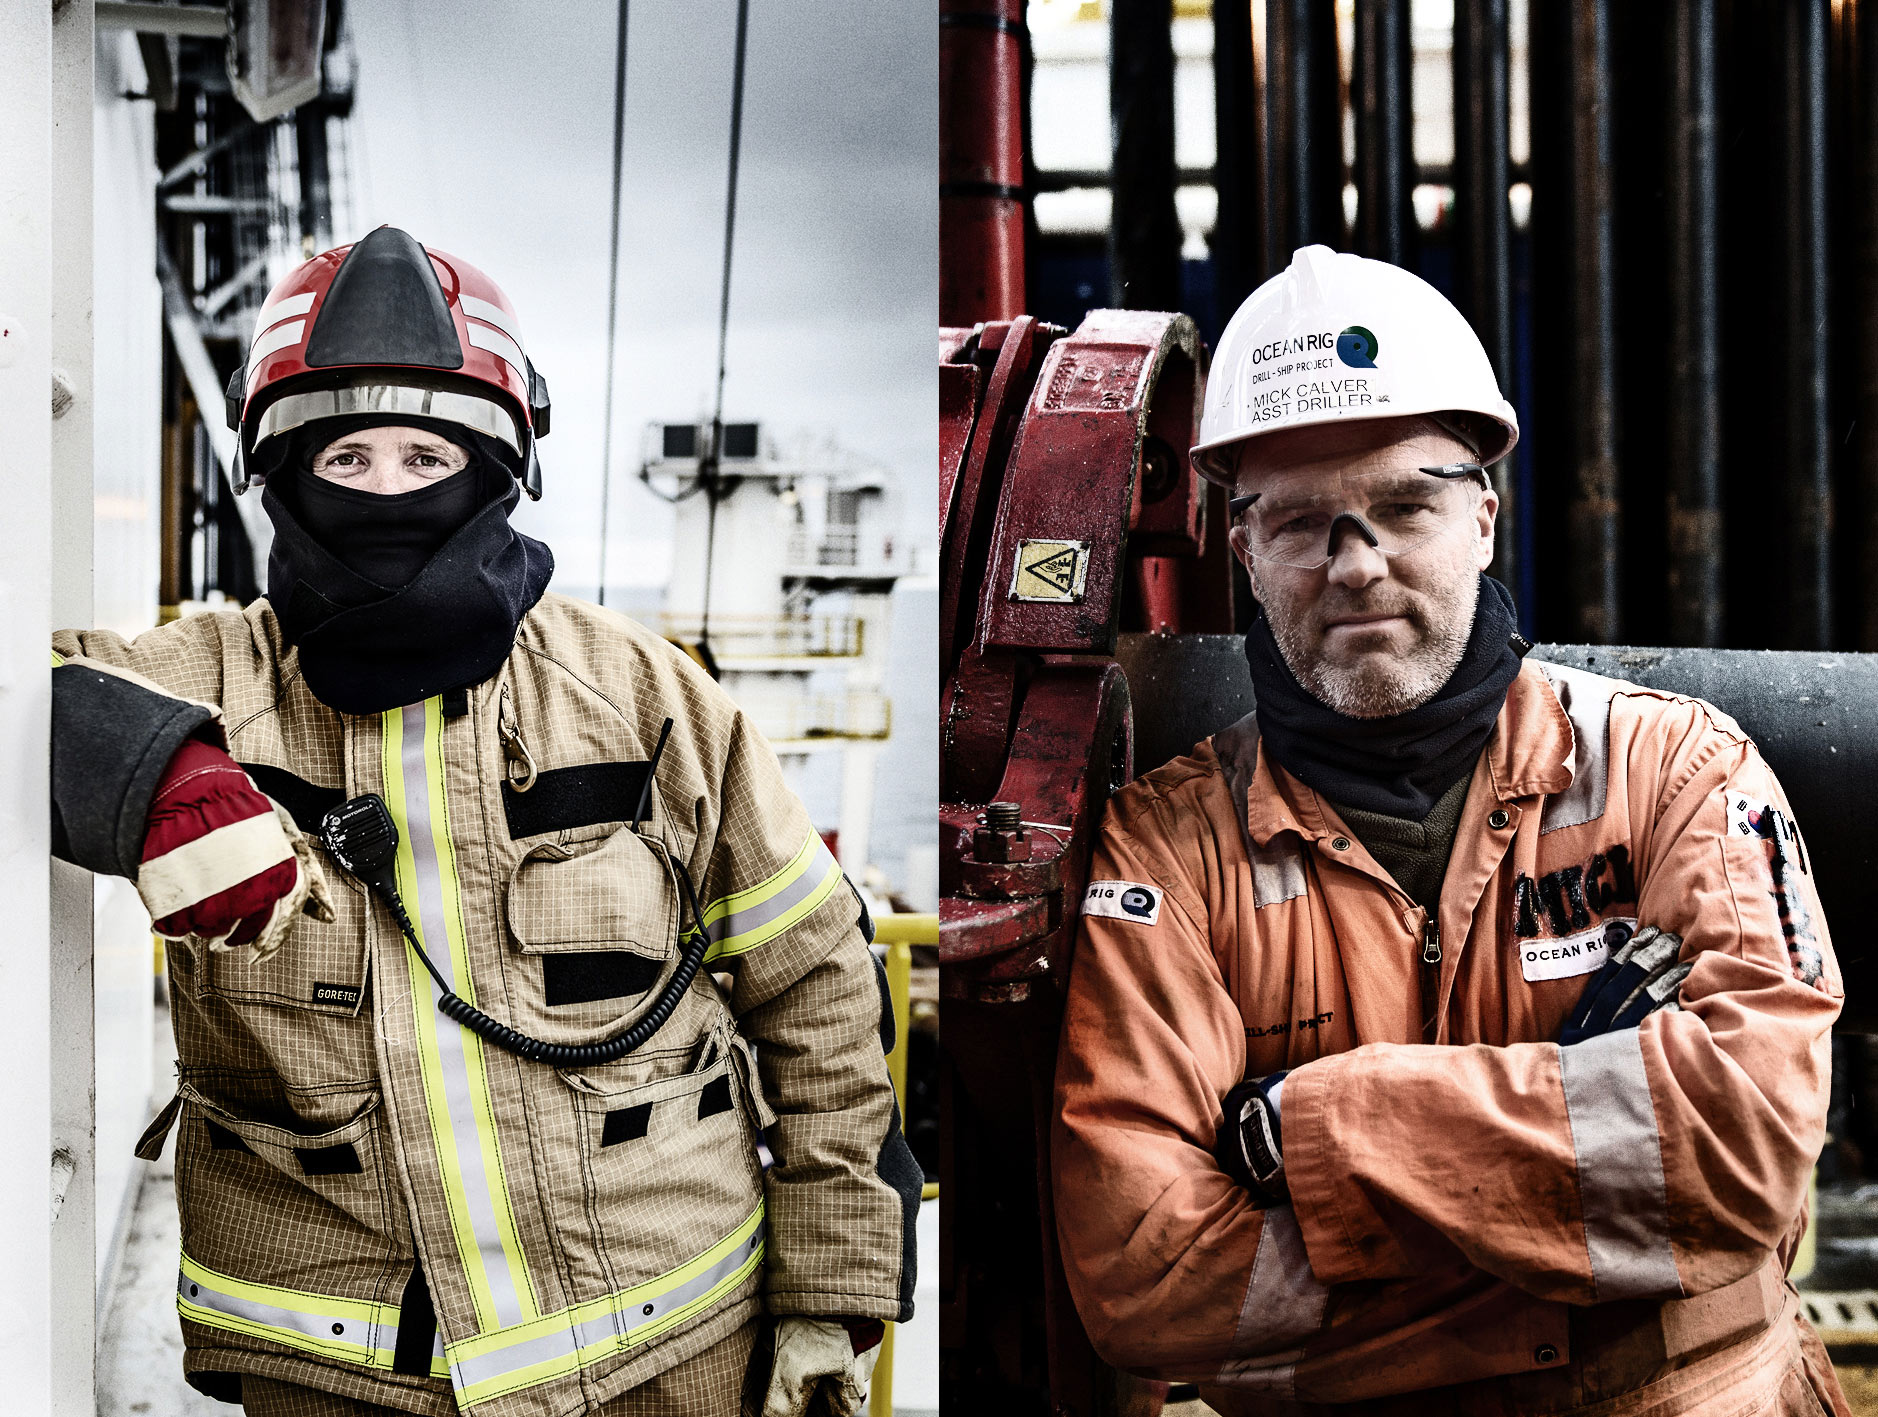 Greenland Offshore Portraits of oil rig workers